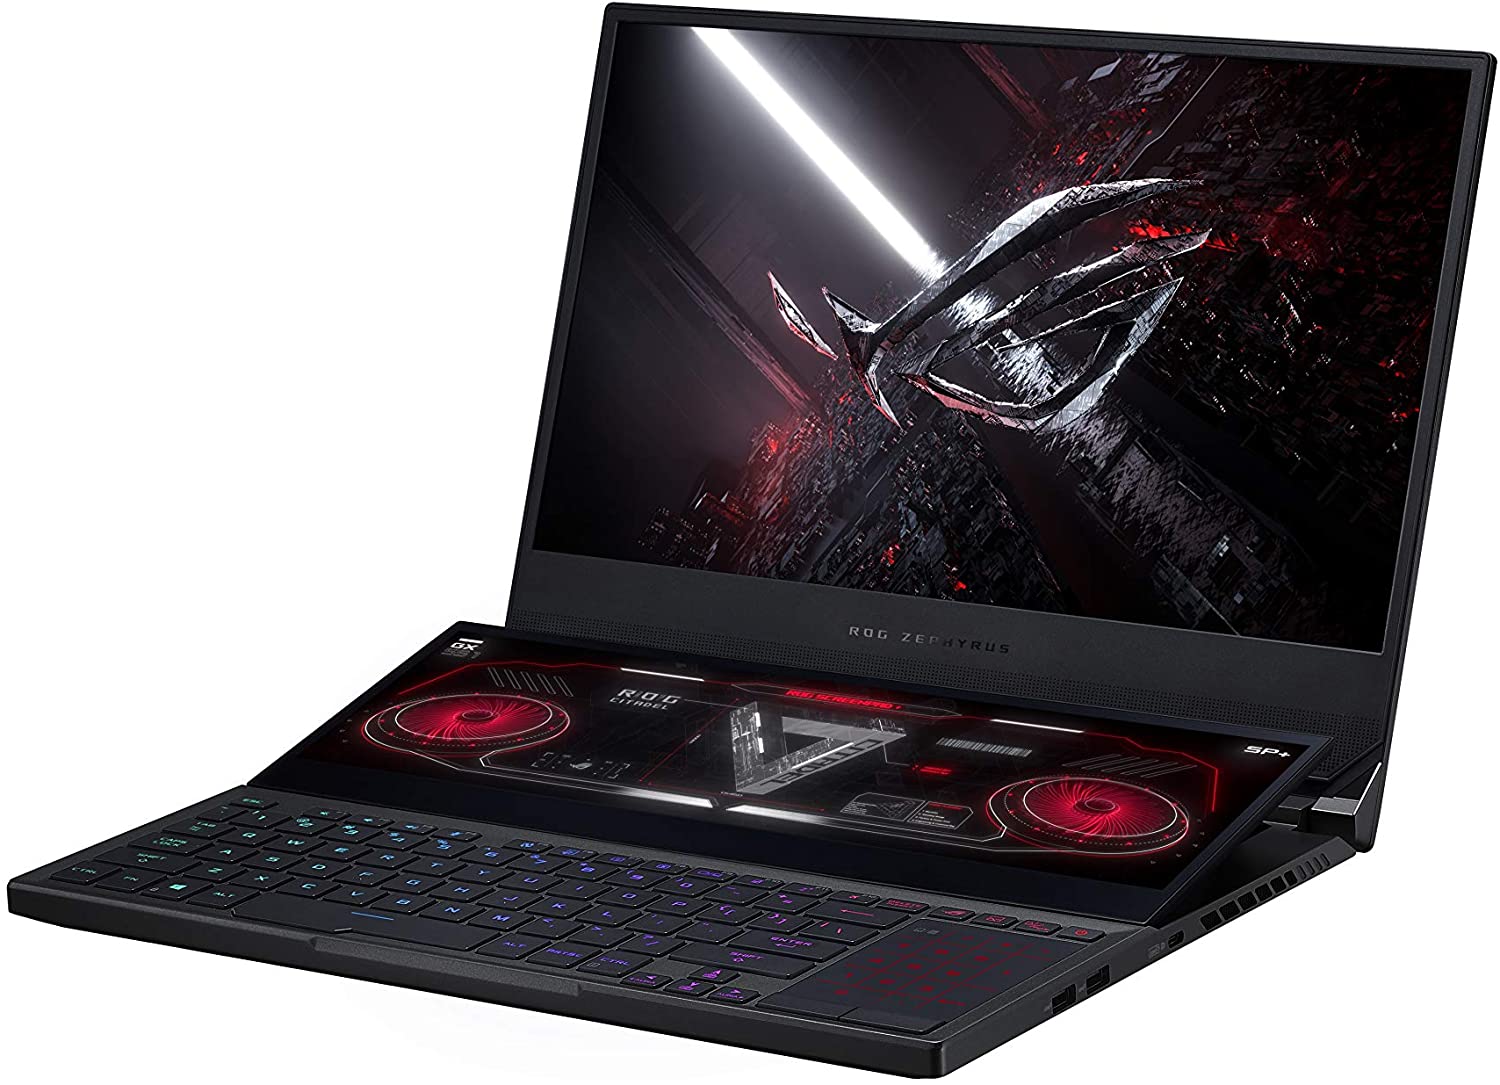 10 Best Touch Screen Laptop For Gaming In 2022 [Buying Guide]